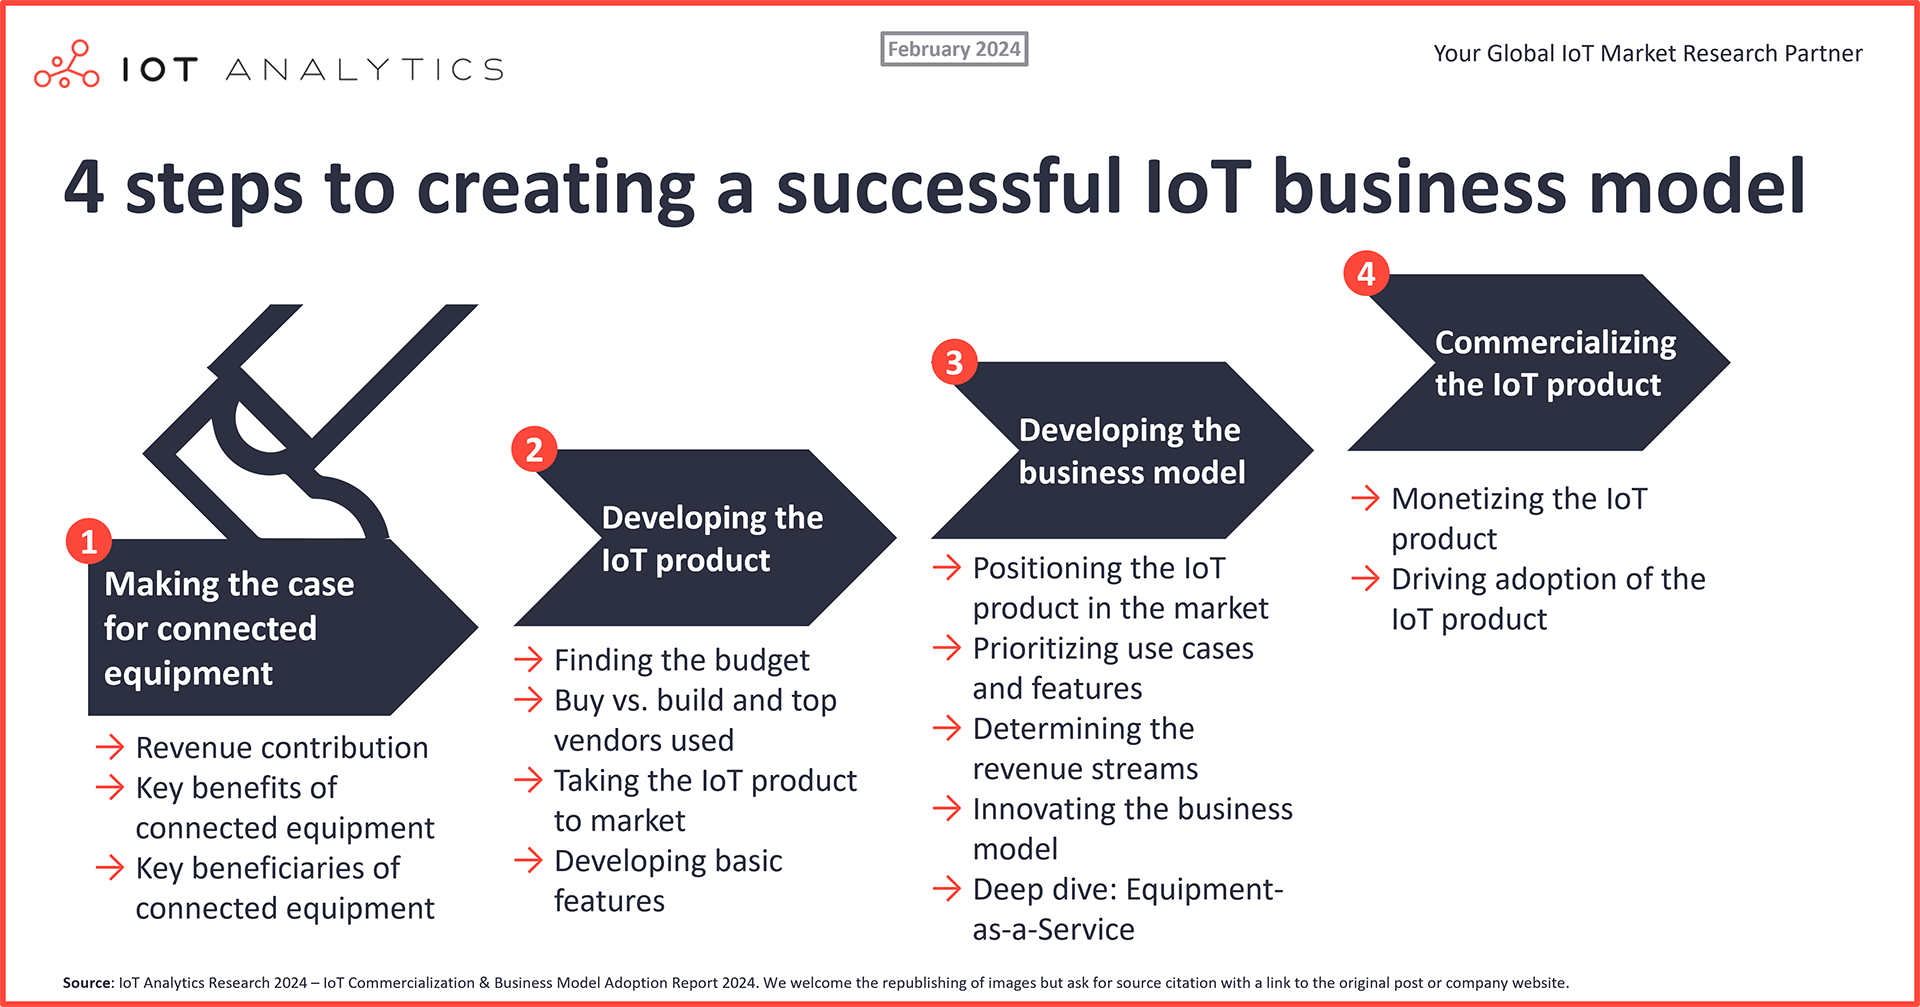 4 steps to creating a successful IoT business